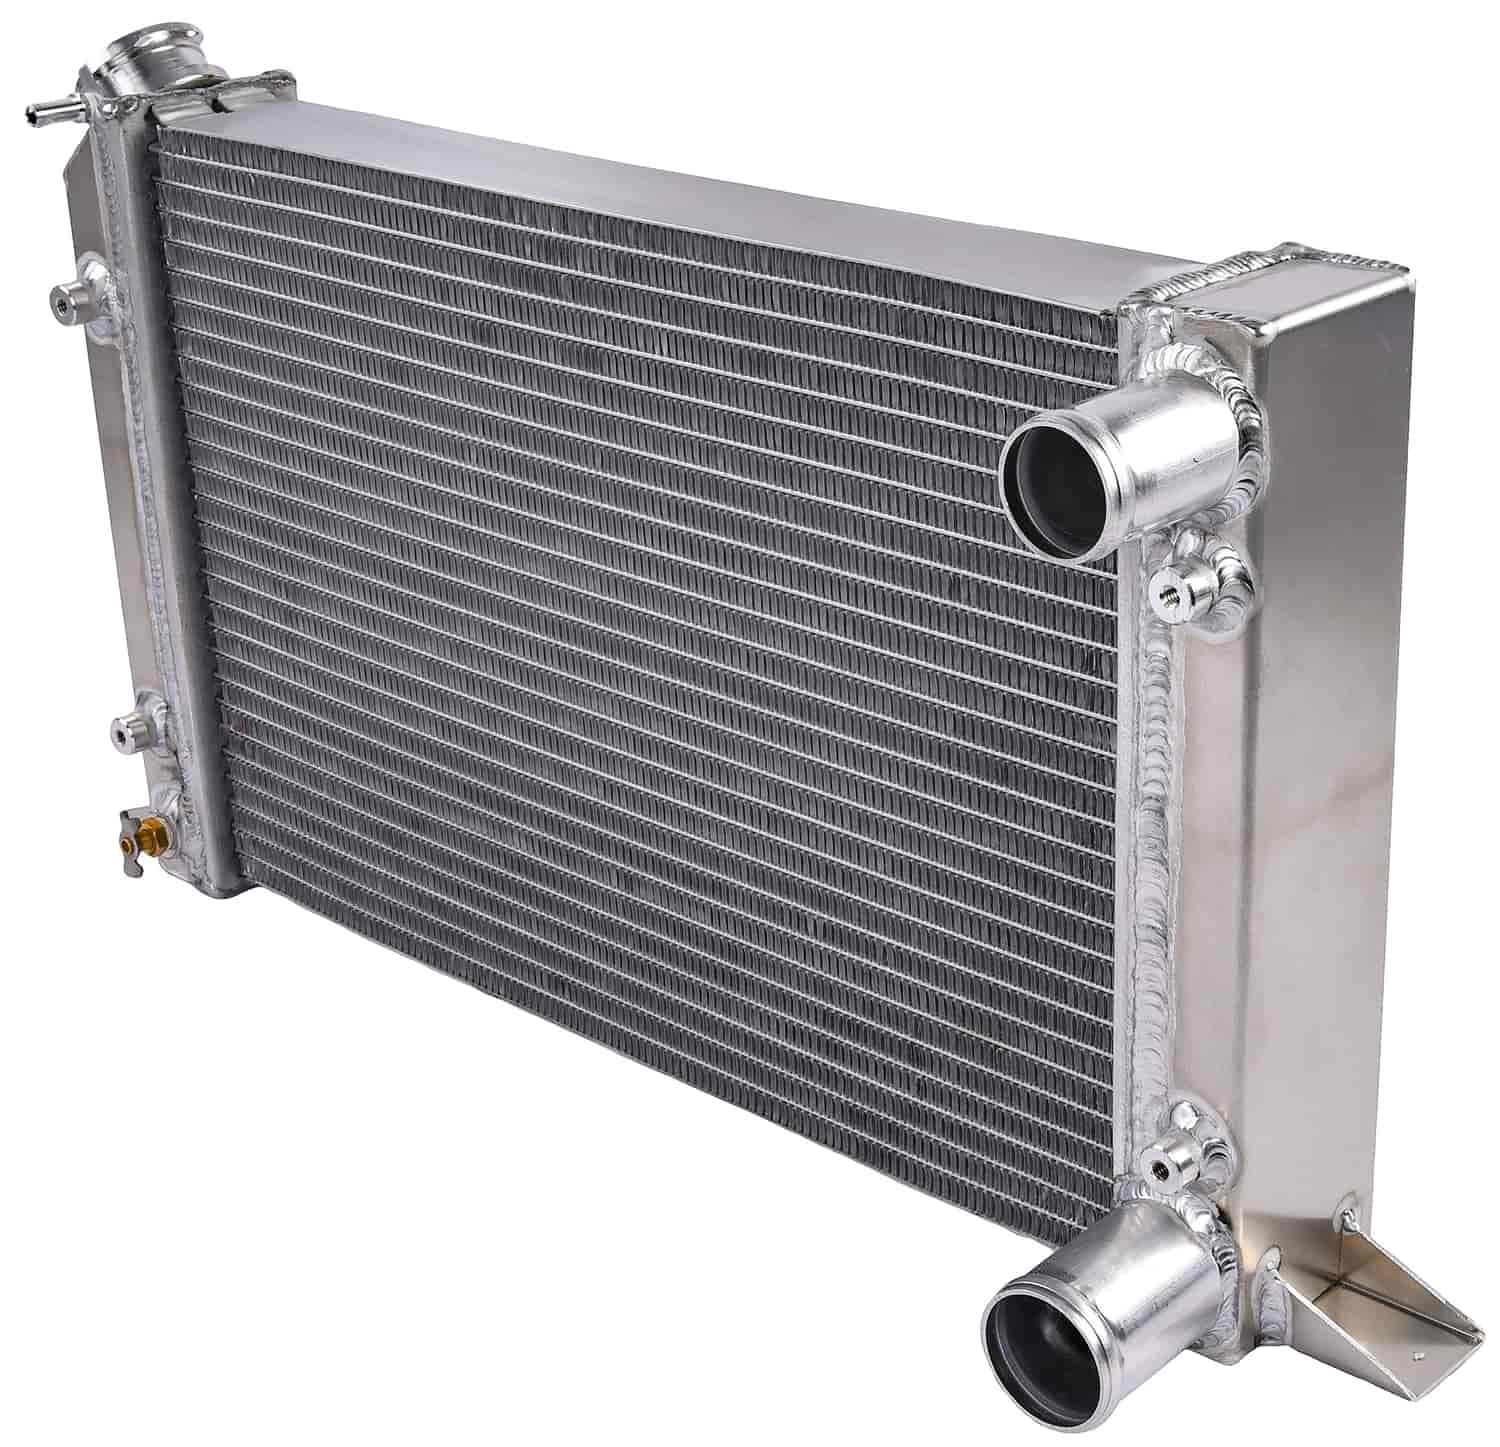 Scirocco/Pro Stock Style Lightweight Aluminum Radiator [2 Row, Drag Race Only]